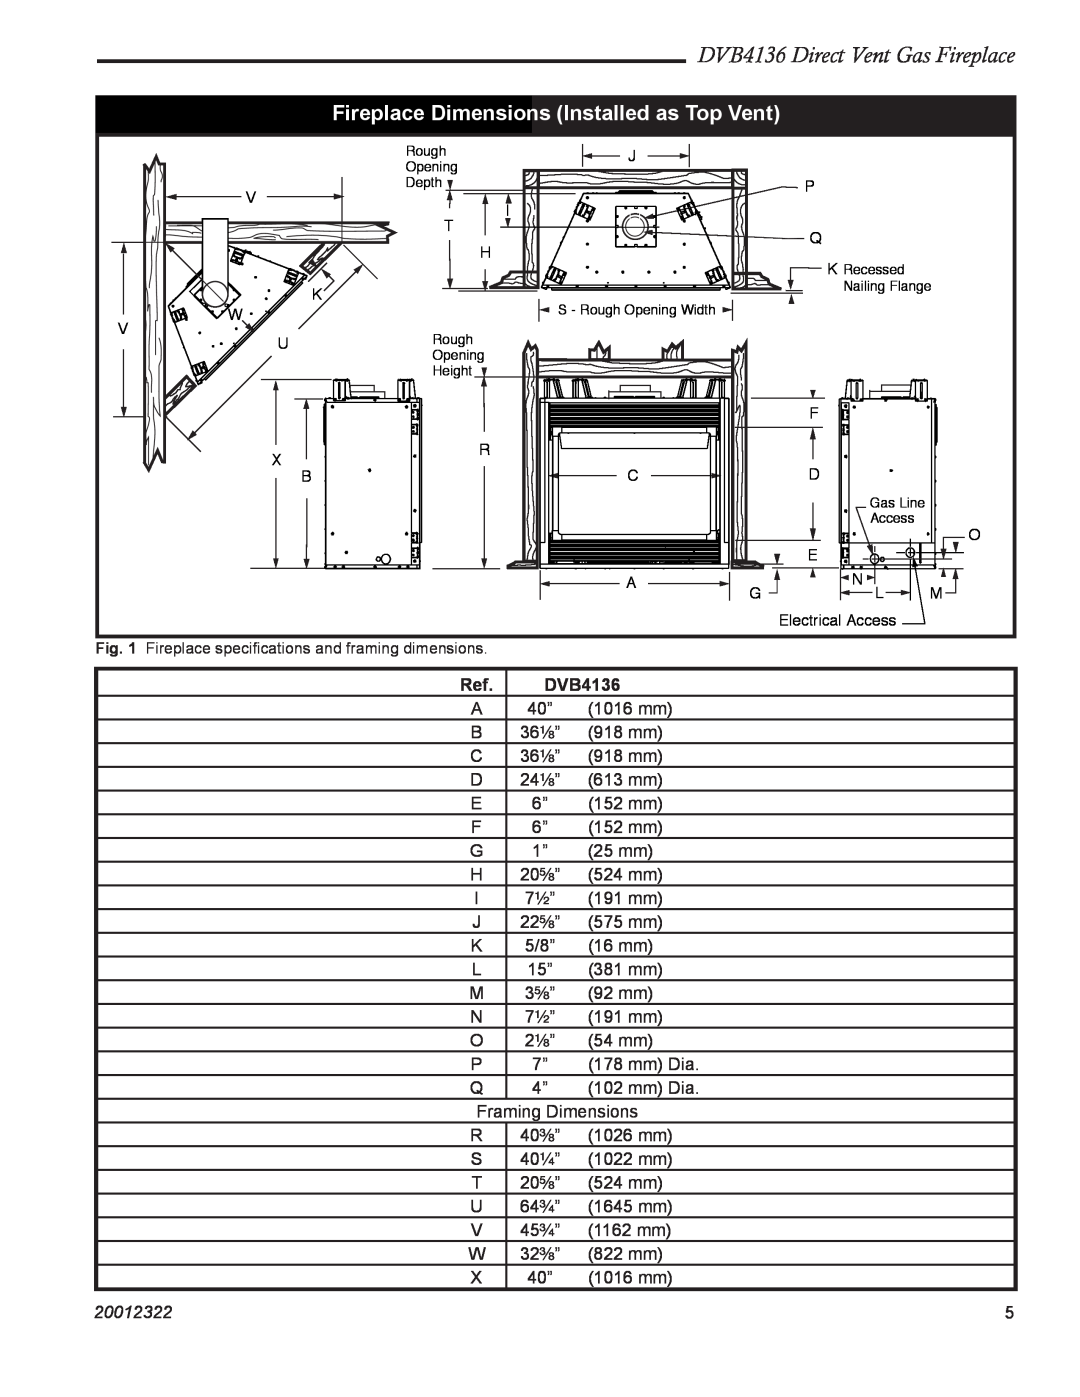 Majestic Appliances manual Fireplace Dimensions Installed as Top Vent, DVB4136 Direct Vent Gas Fireplace, Ref. DVB4136 